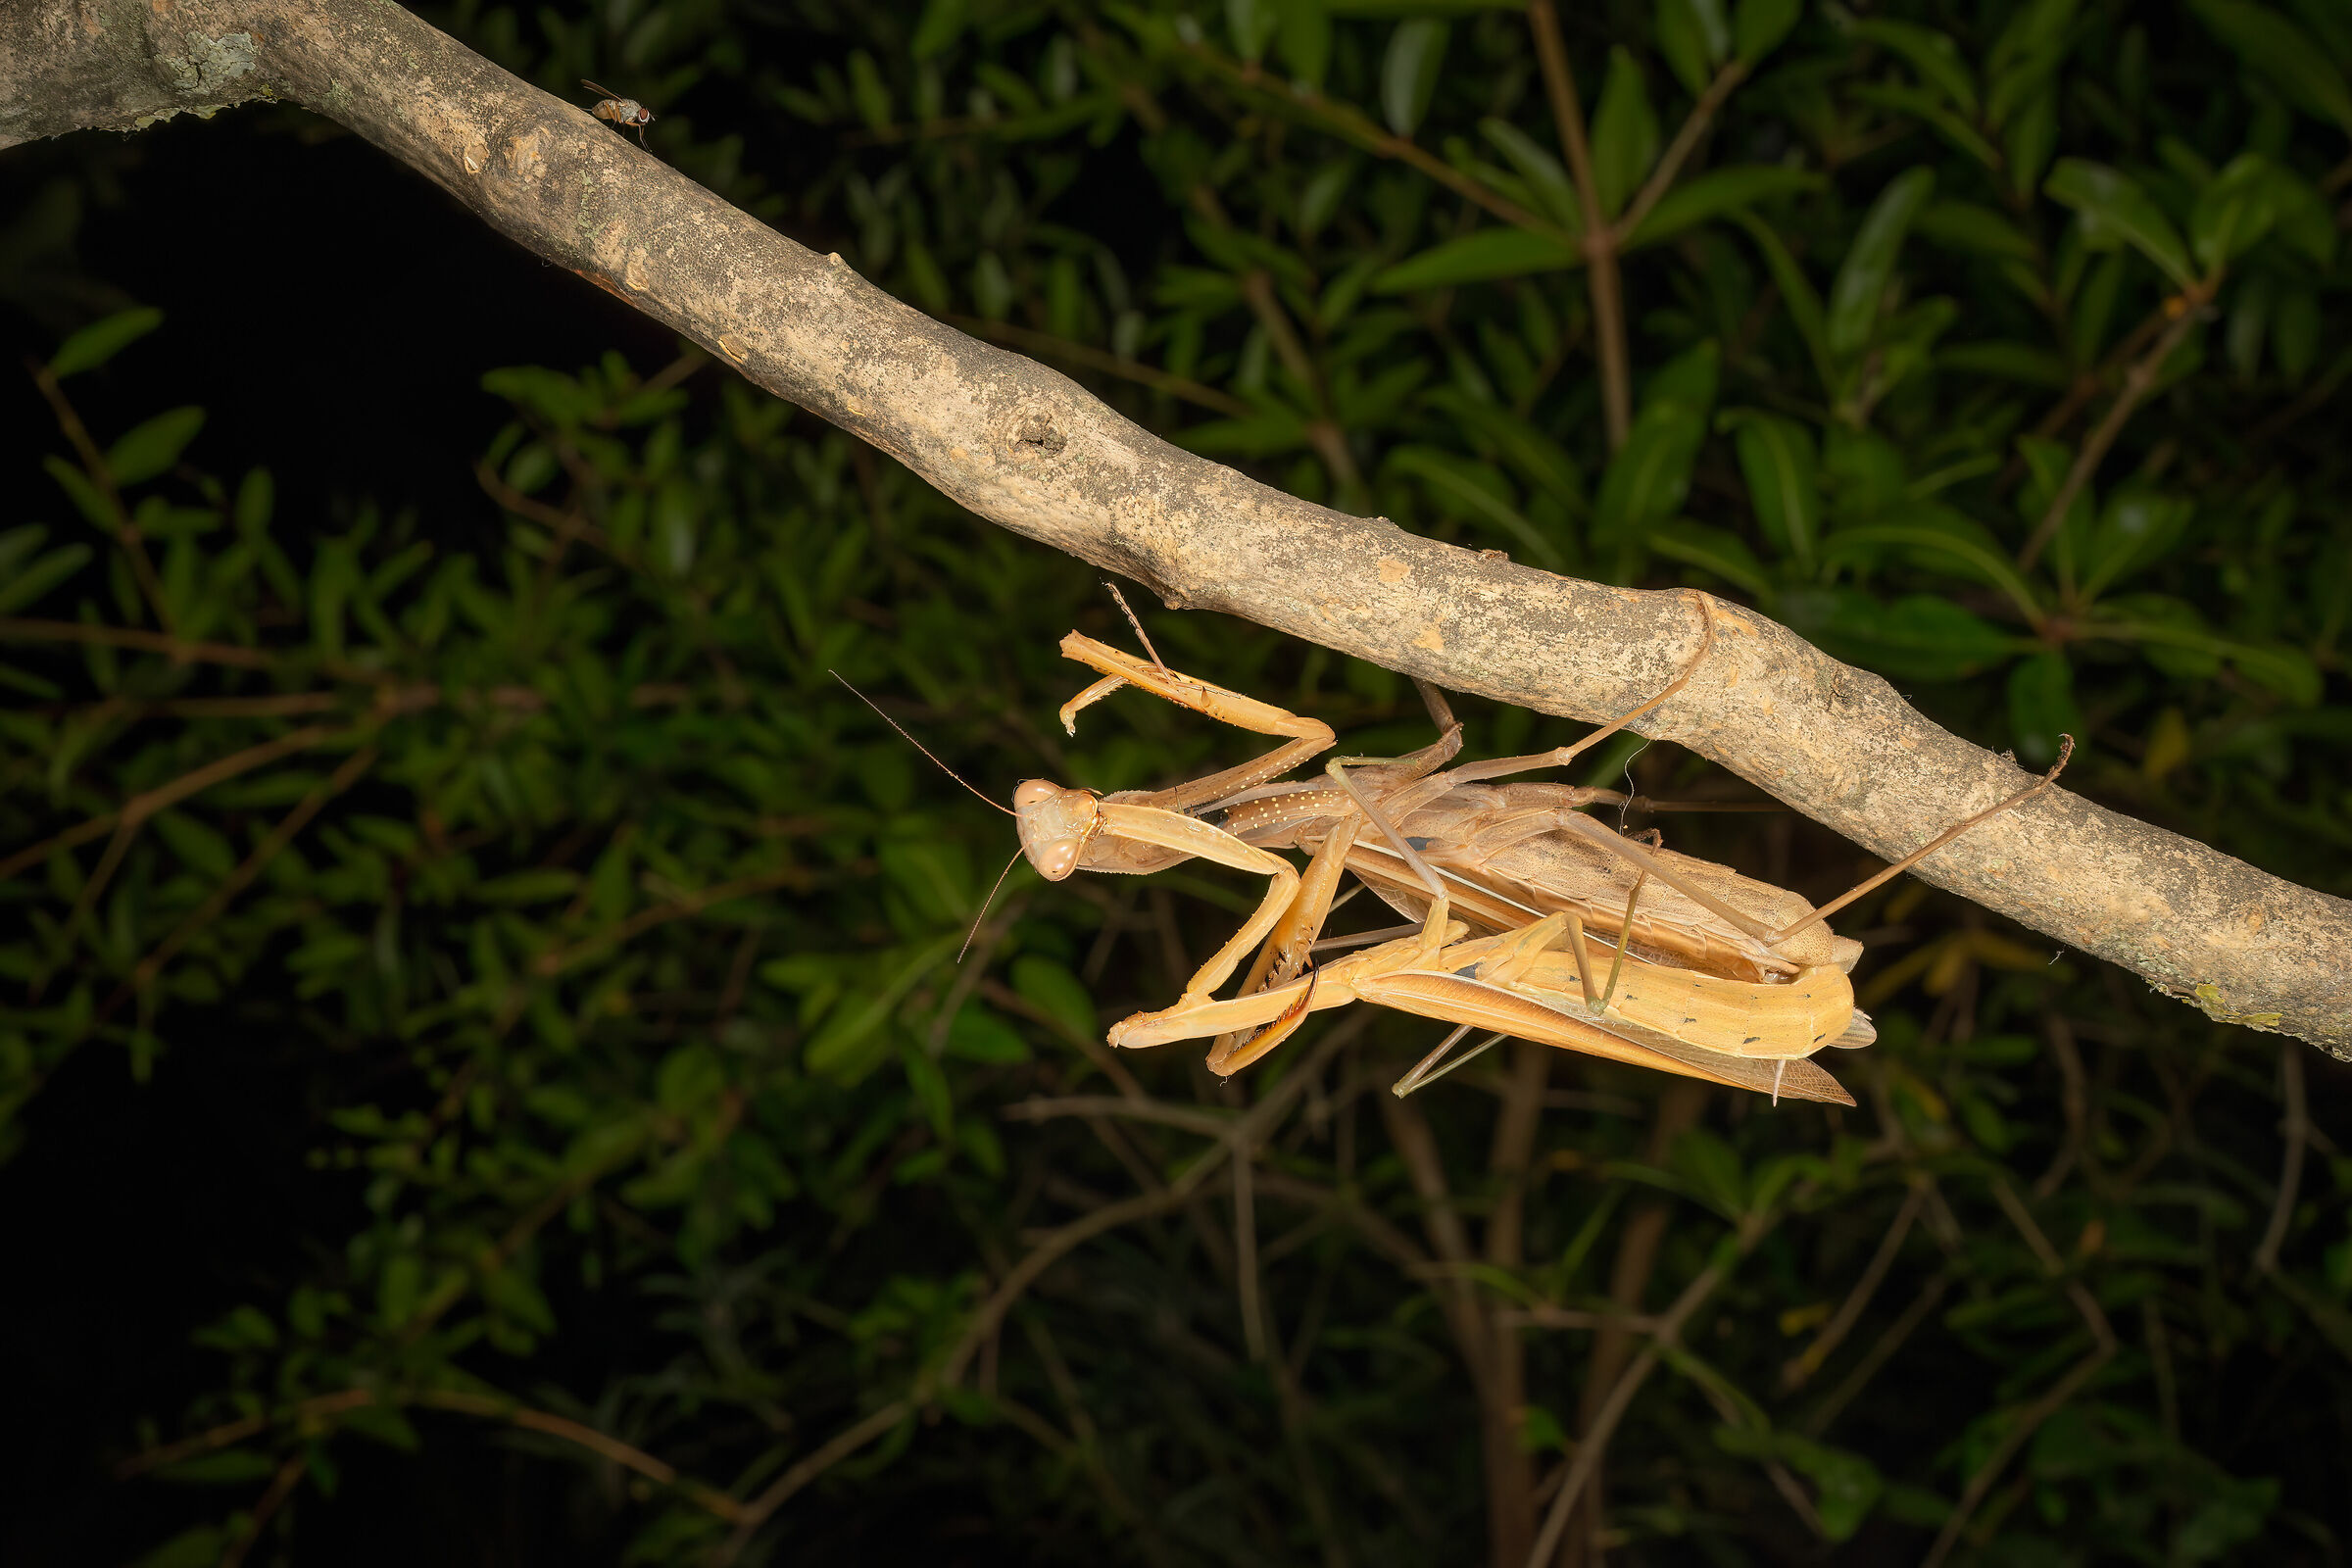 The mating of the mantis, 2...